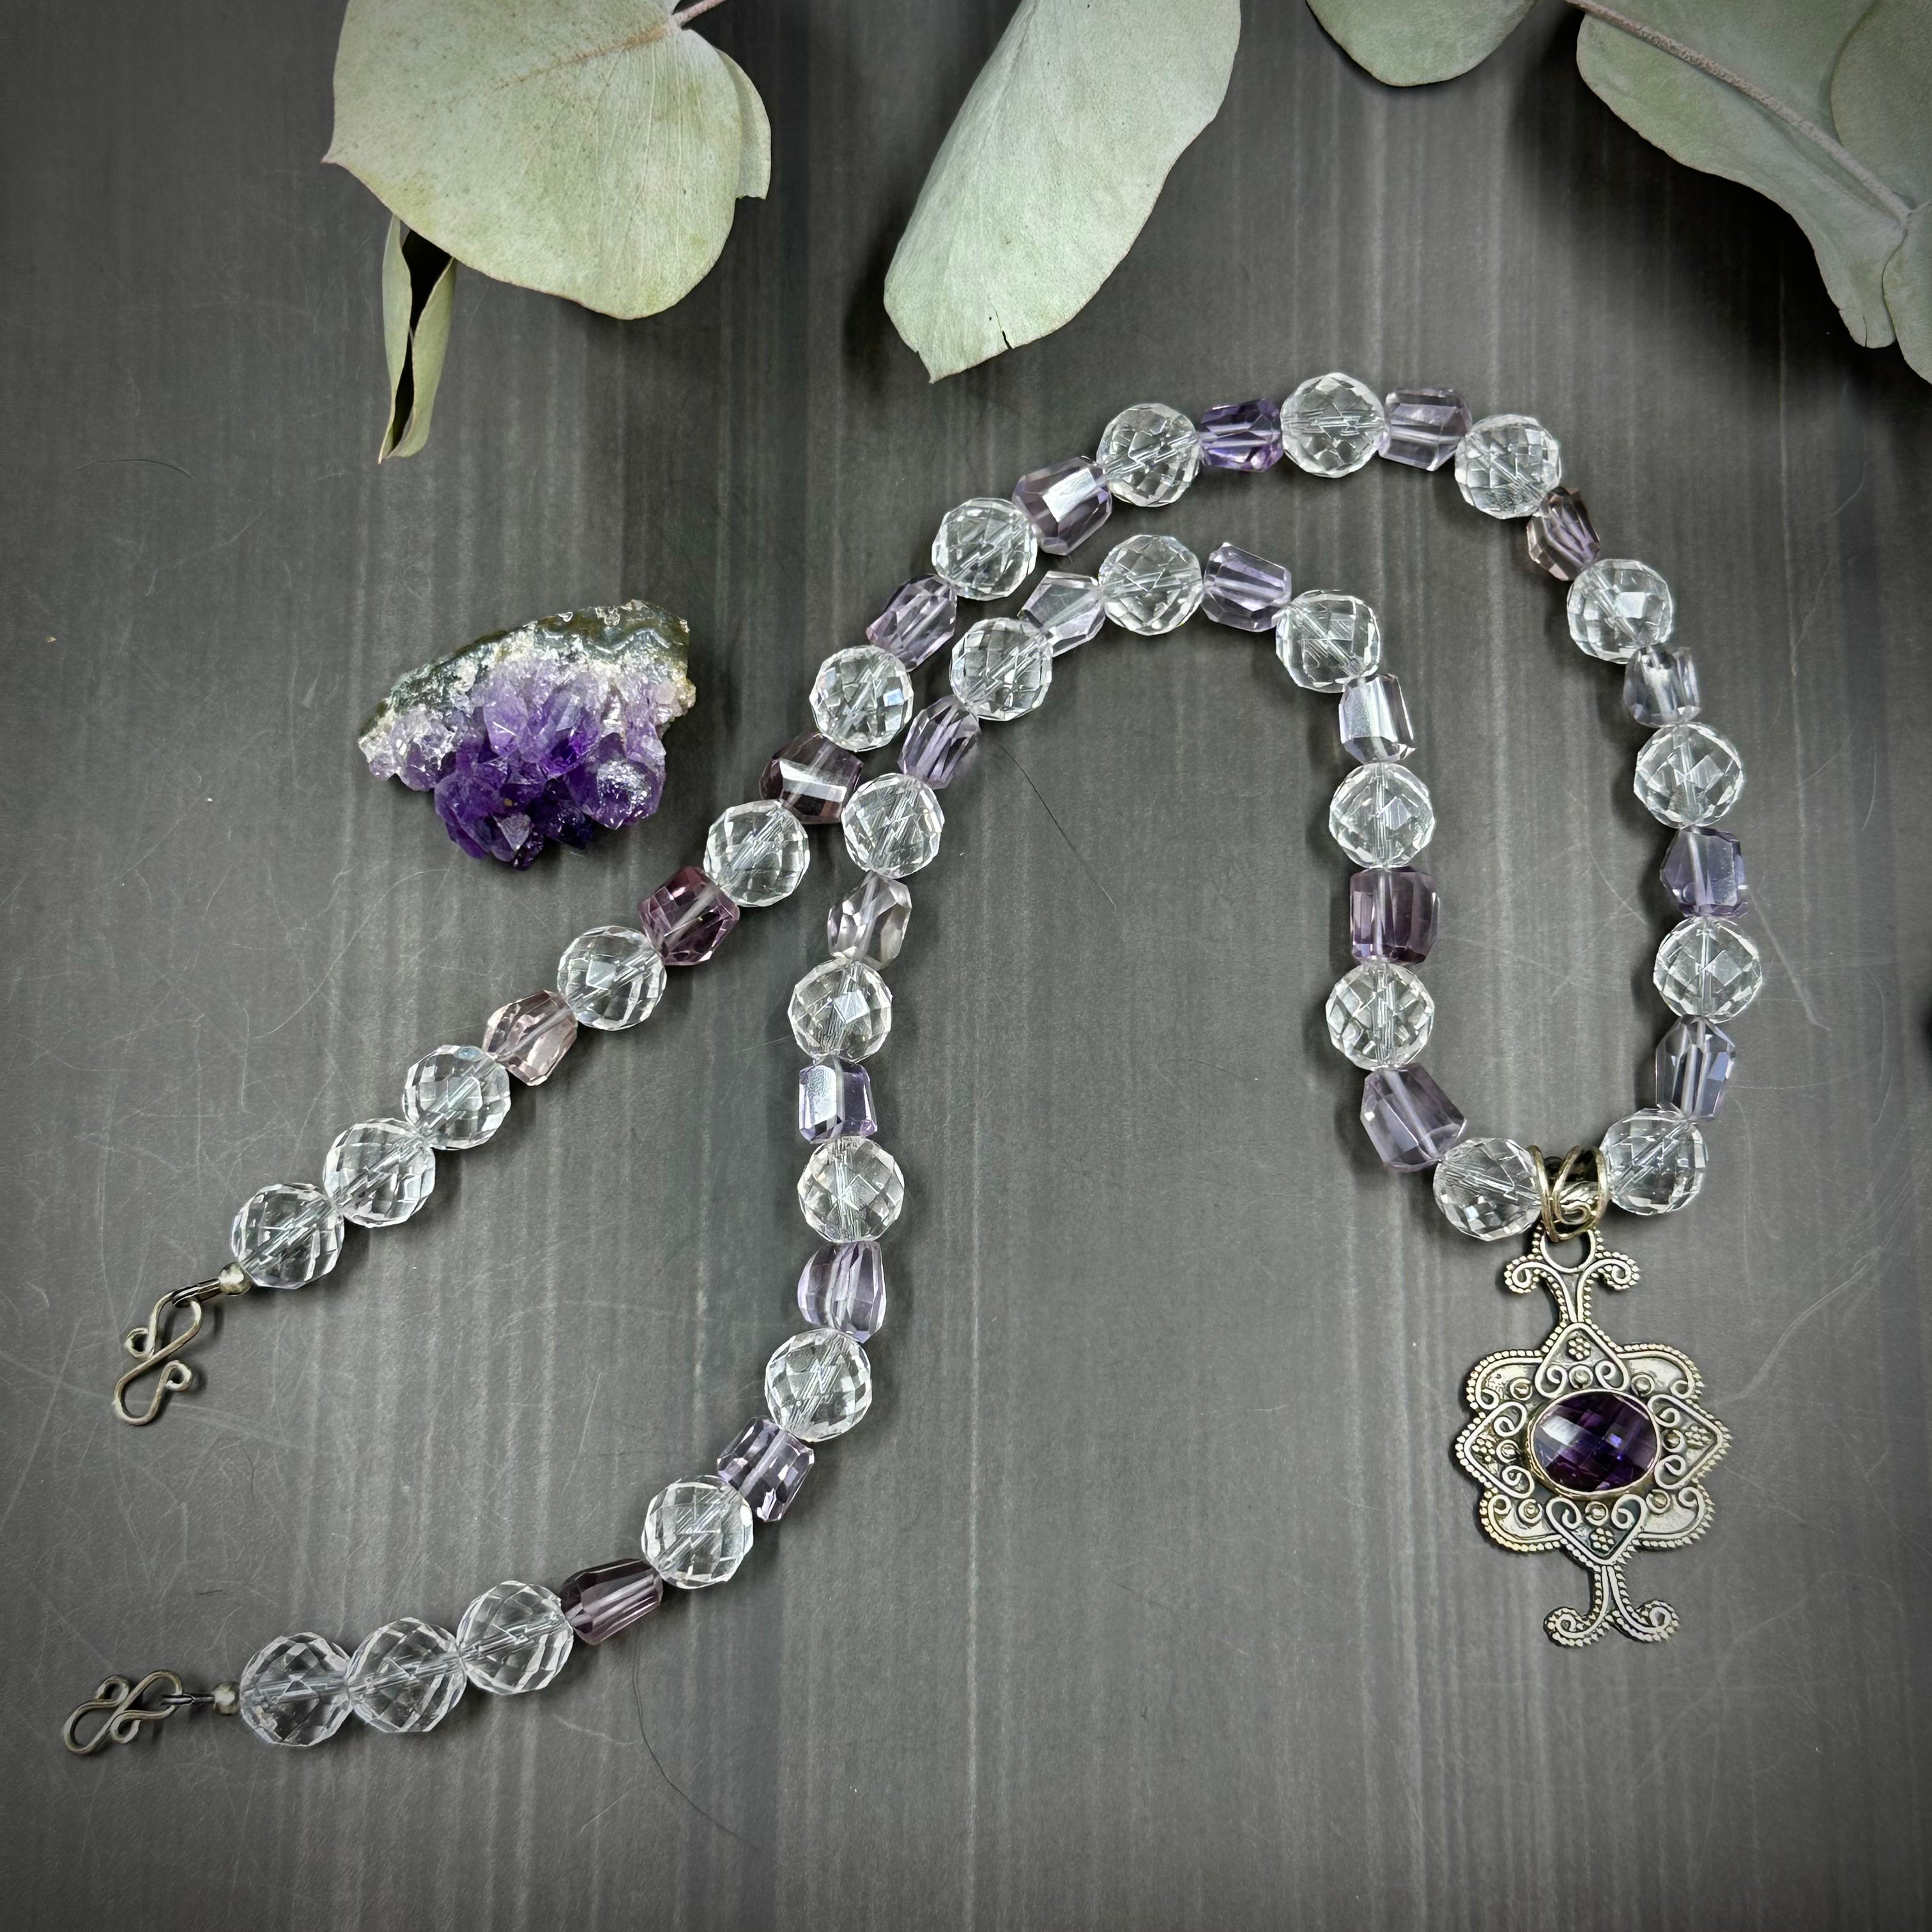 Amethyst and Crystal Quartz Sterling Silver Necklace